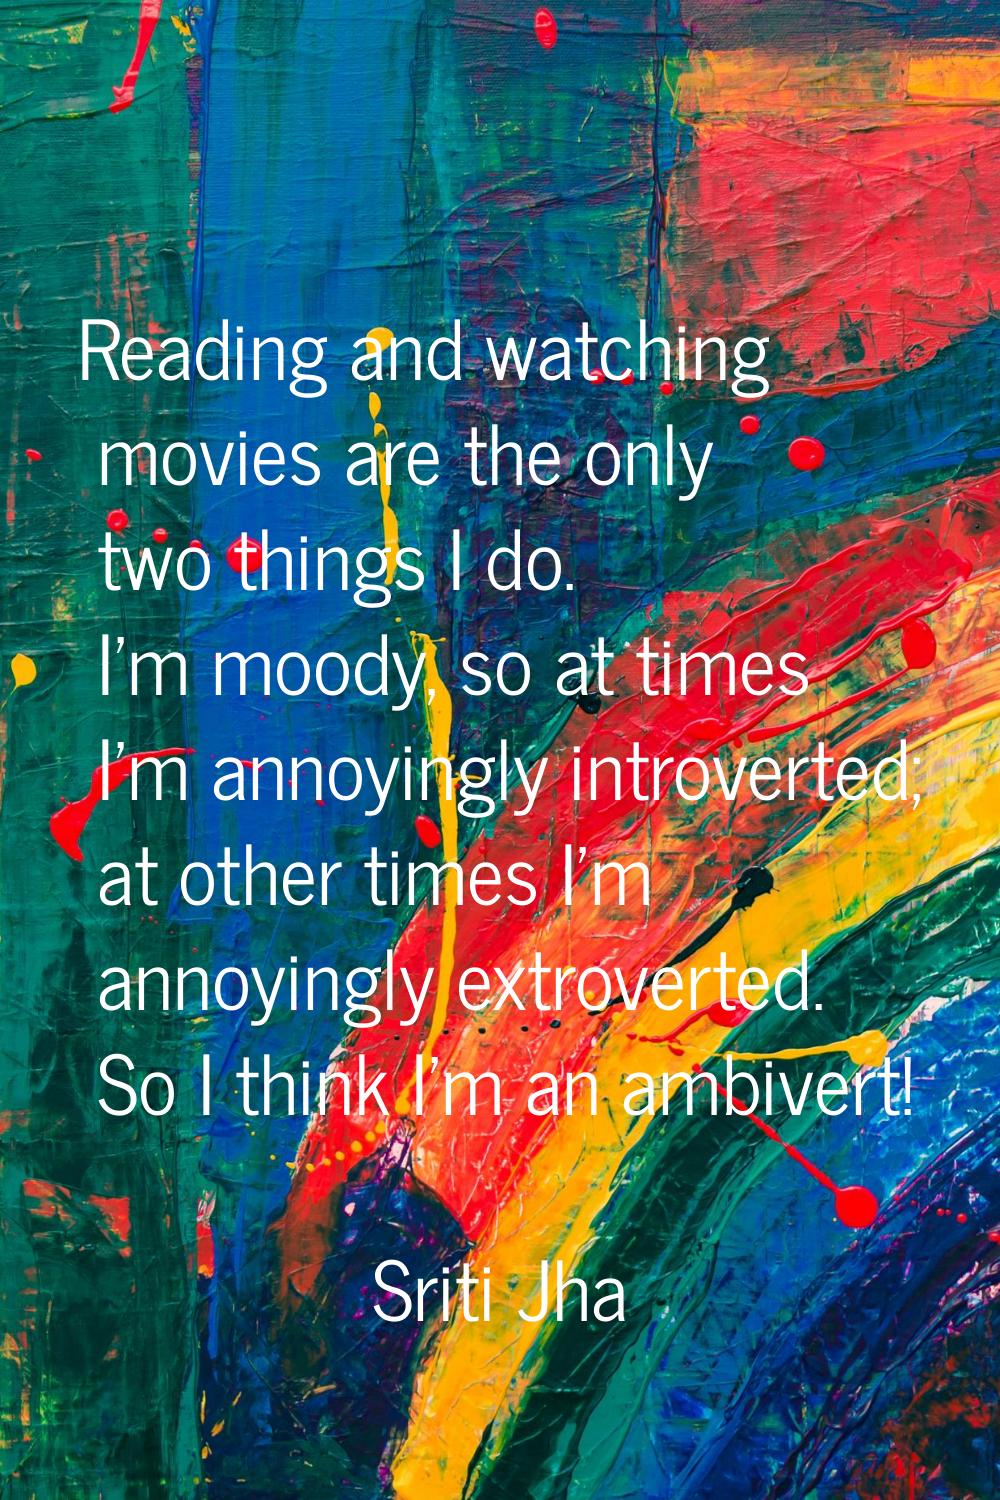 Reading and watching movies are the only two things I do. I'm moody, so at times I'm annoyingly int